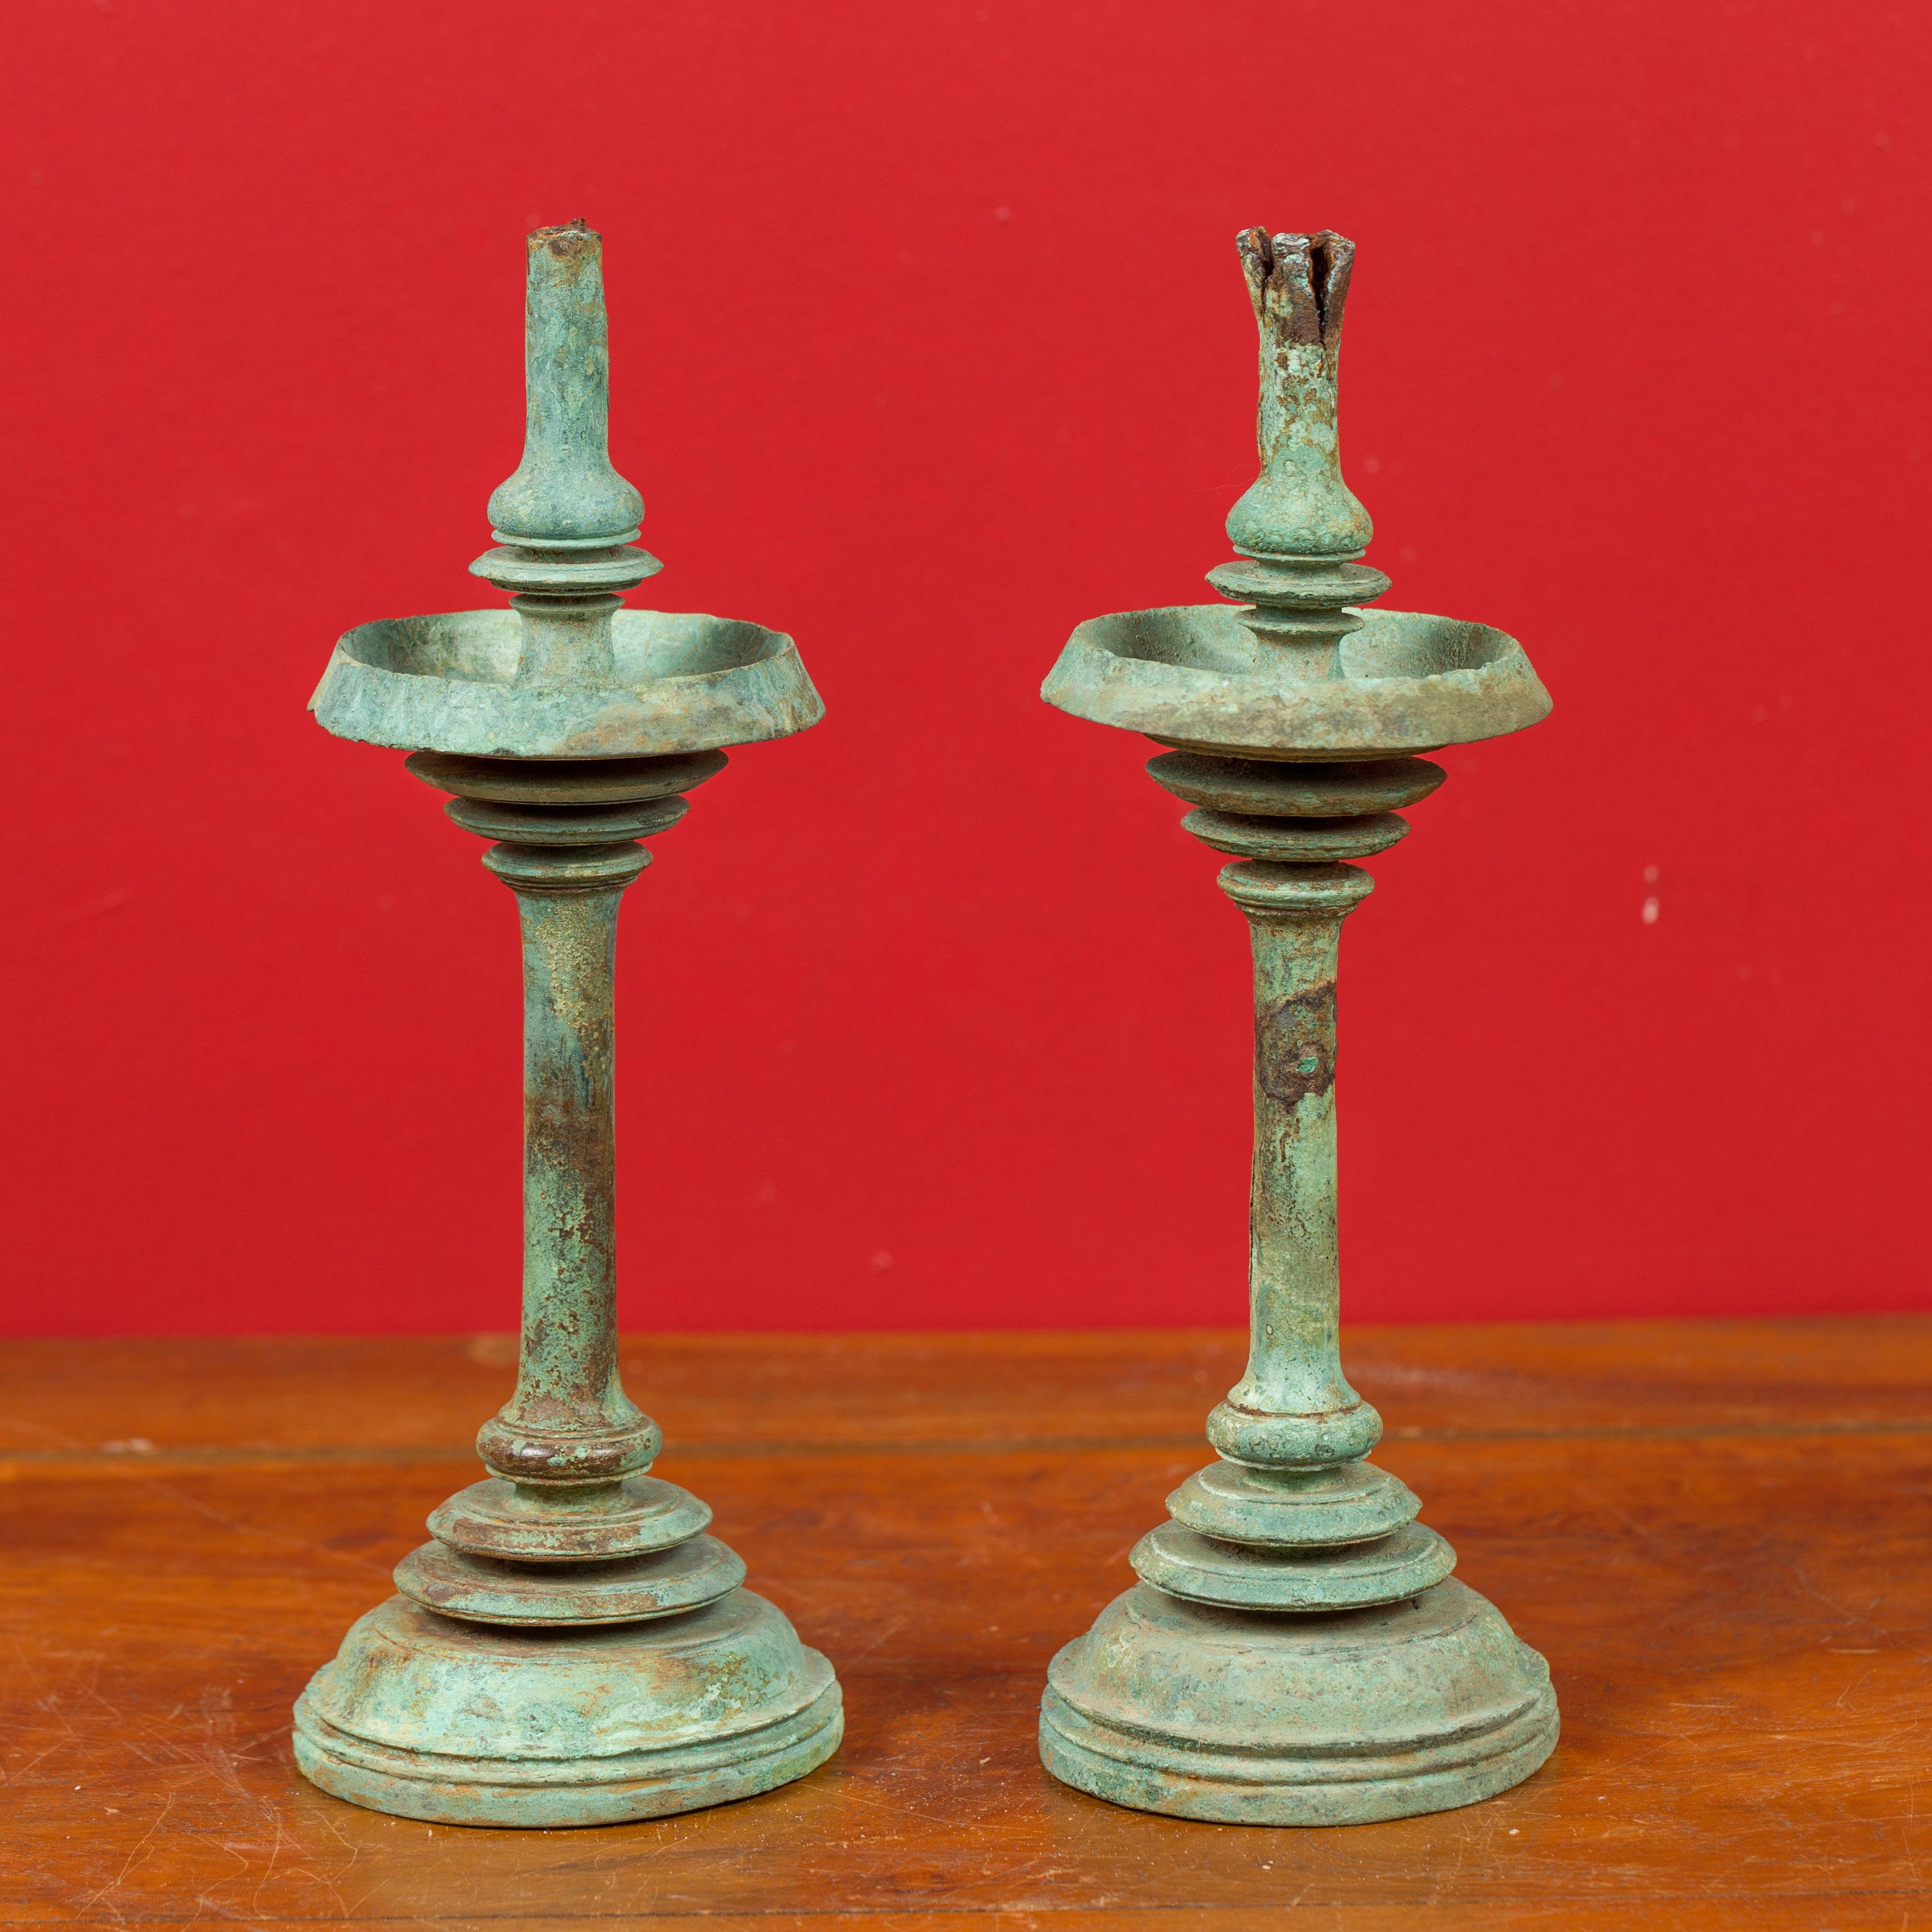 Pair of Angkor-Wat 12th Century Bronze Temple Oil Lamps from the Khmer Empire 3